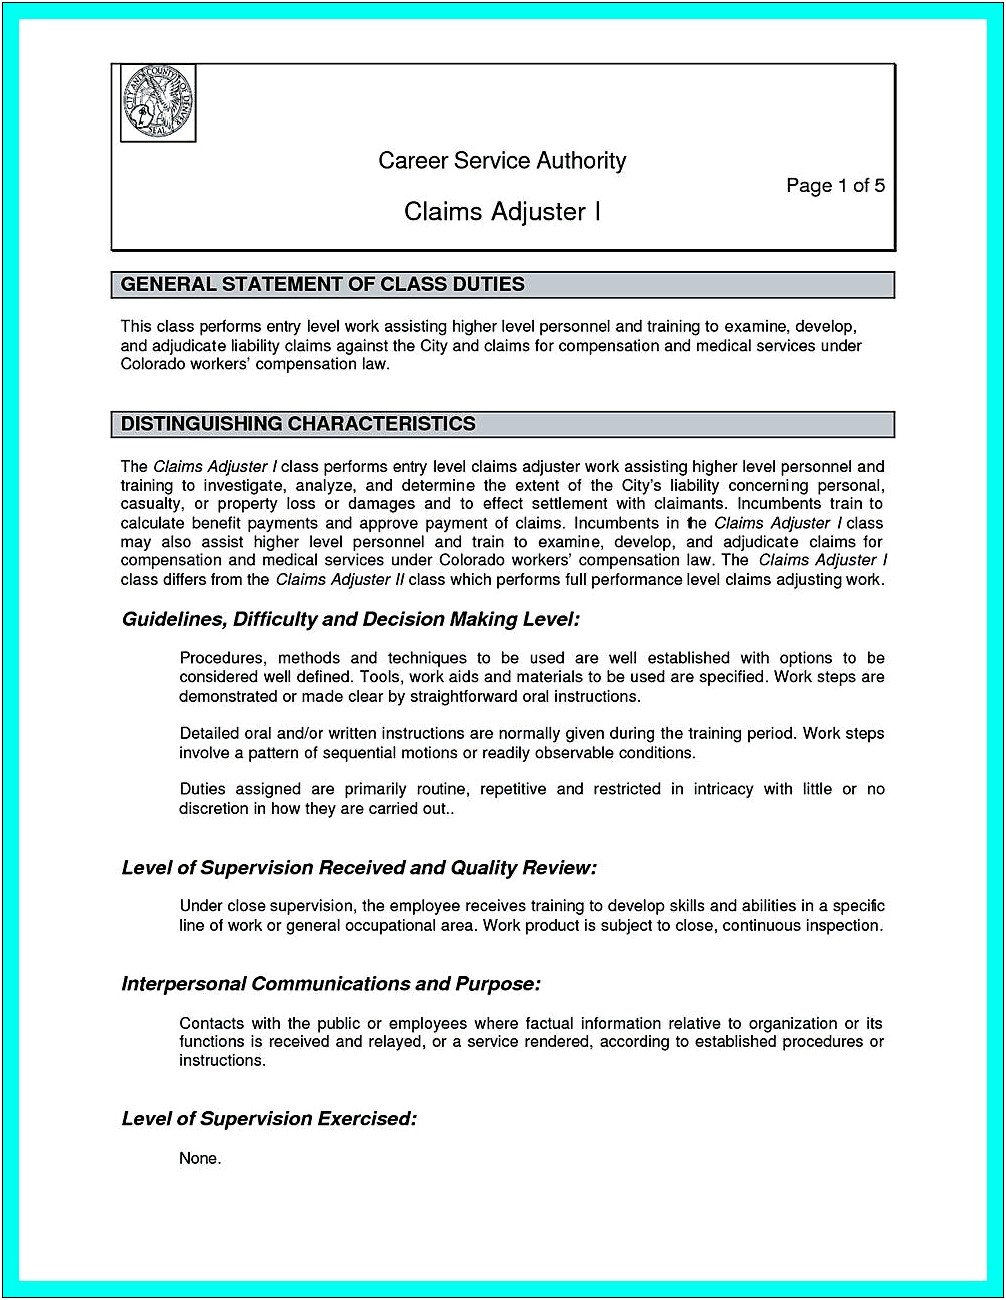 Resume Cover Letter For Claims Adjuster